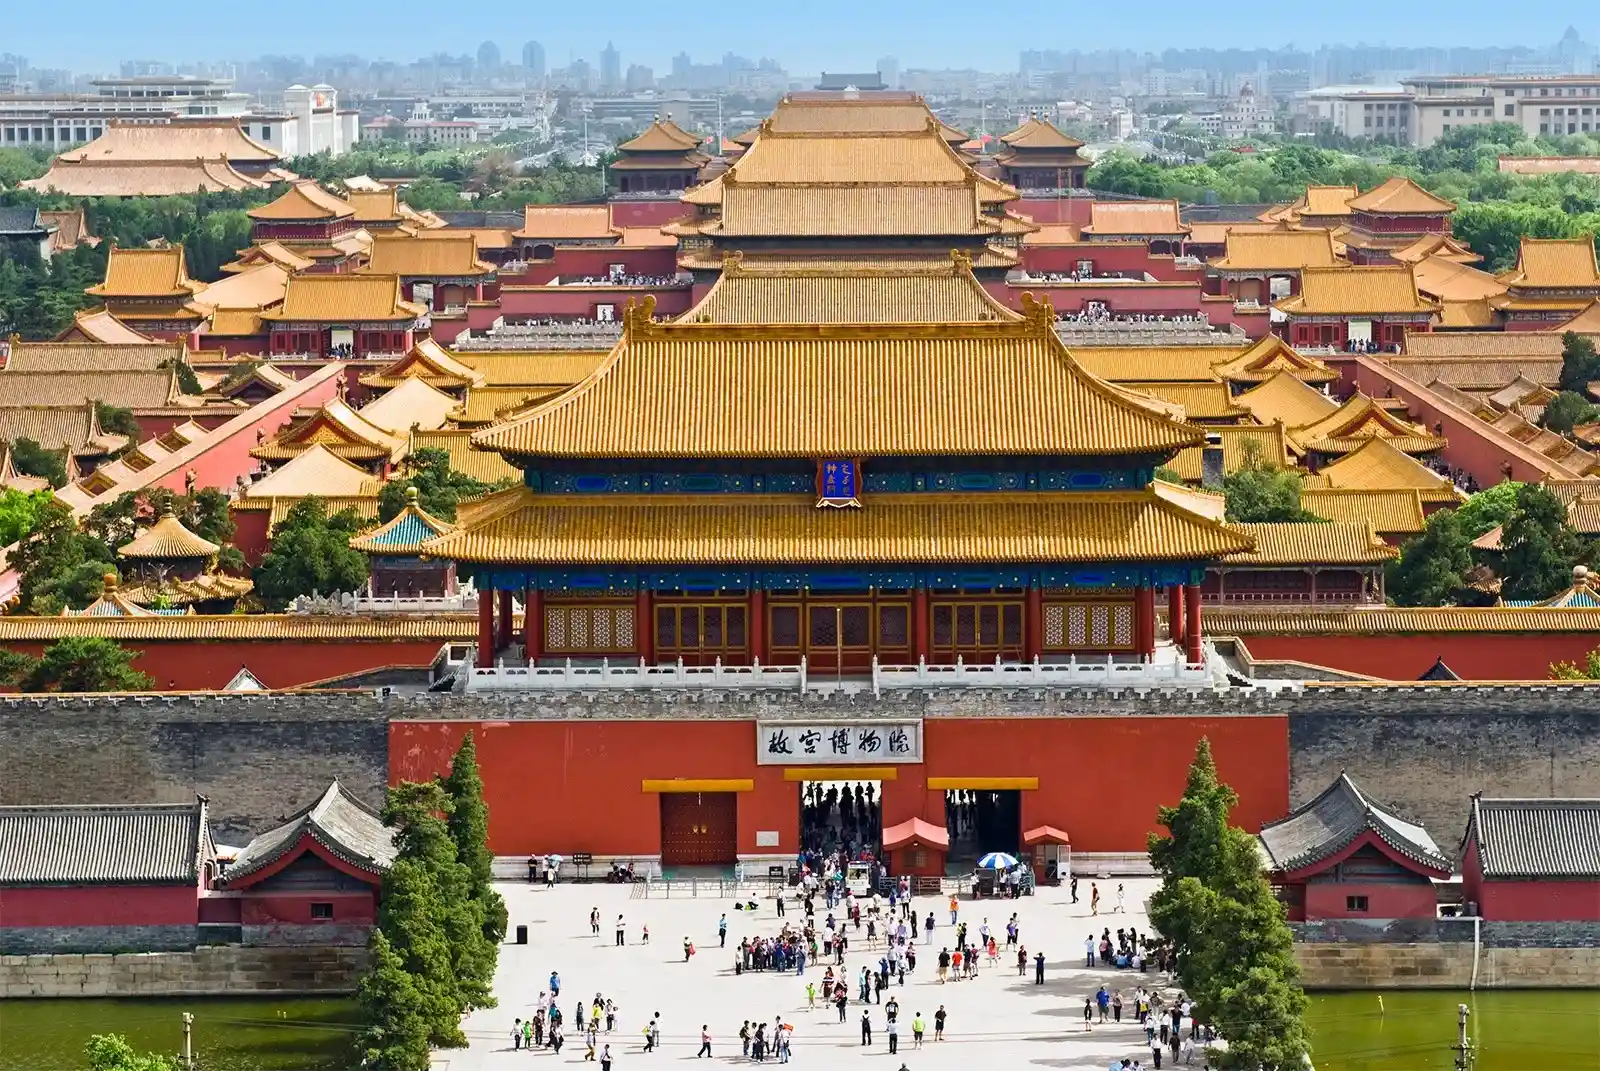 Beijing's Imperial Palace and Forbidden City